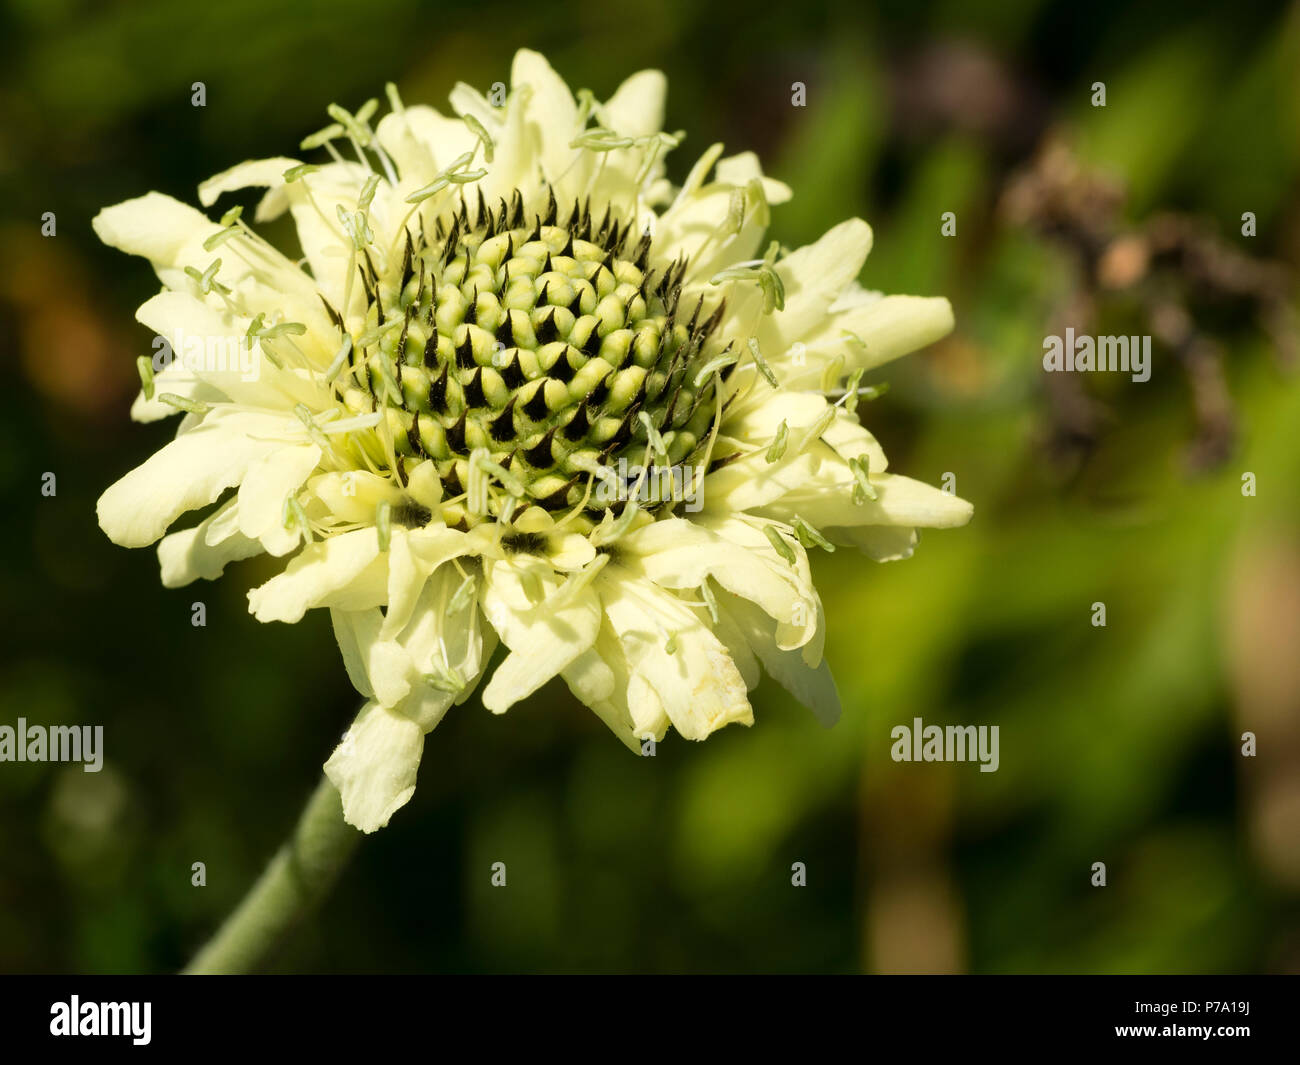 Opening flower head of the giant scabious, Cephalaria gigantea, a summer blooming perennial Stock Photo